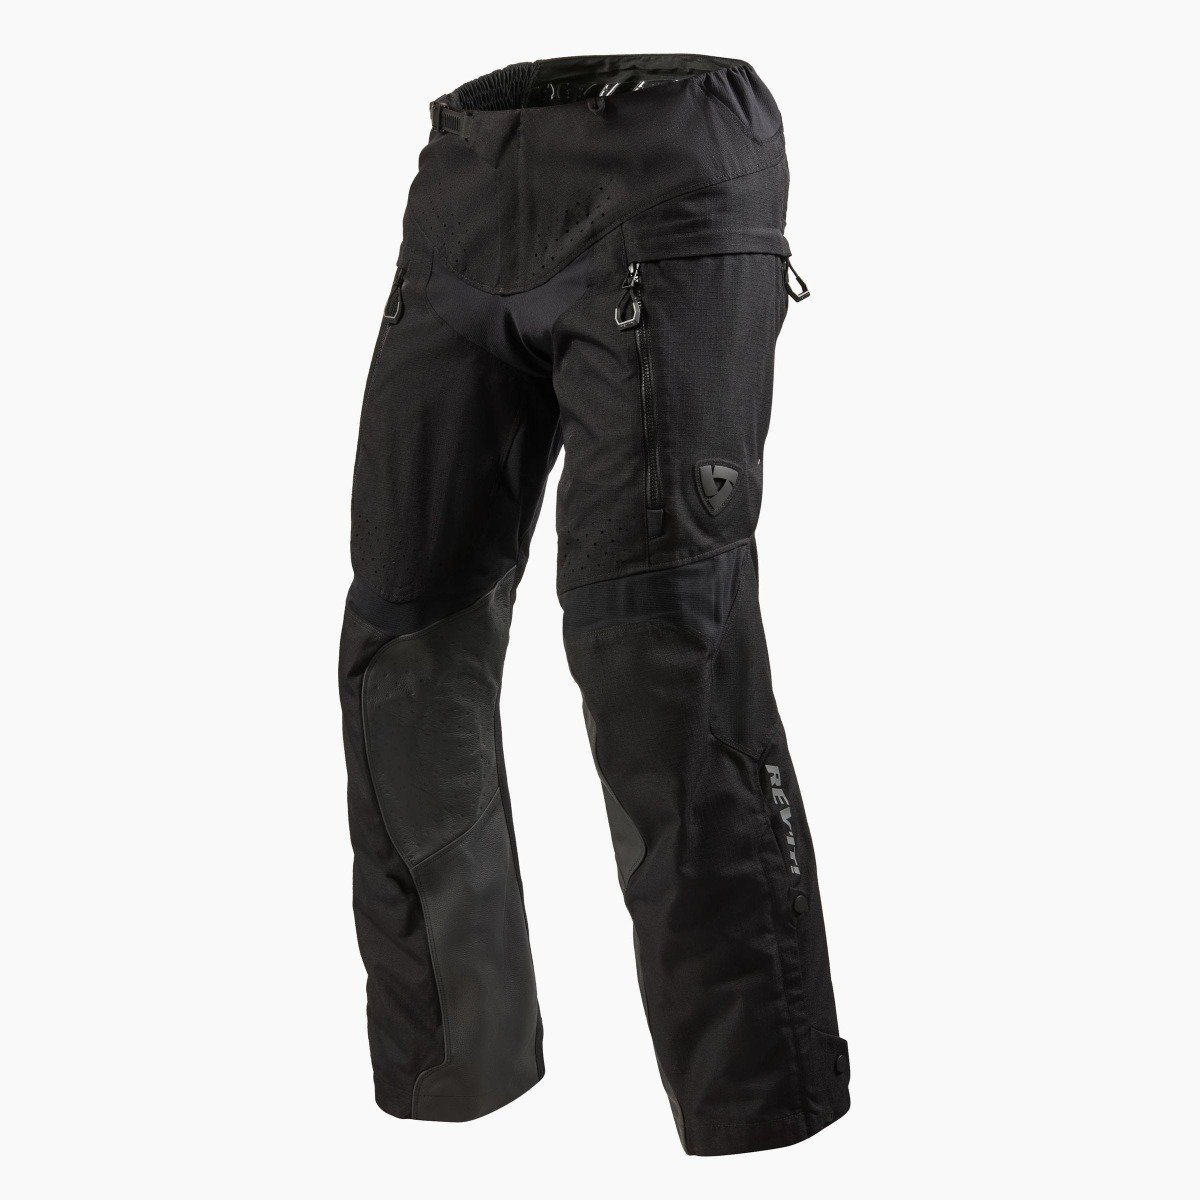 Image of REV'IT! Continent Short Black Motorcycle Pants Talla XYL